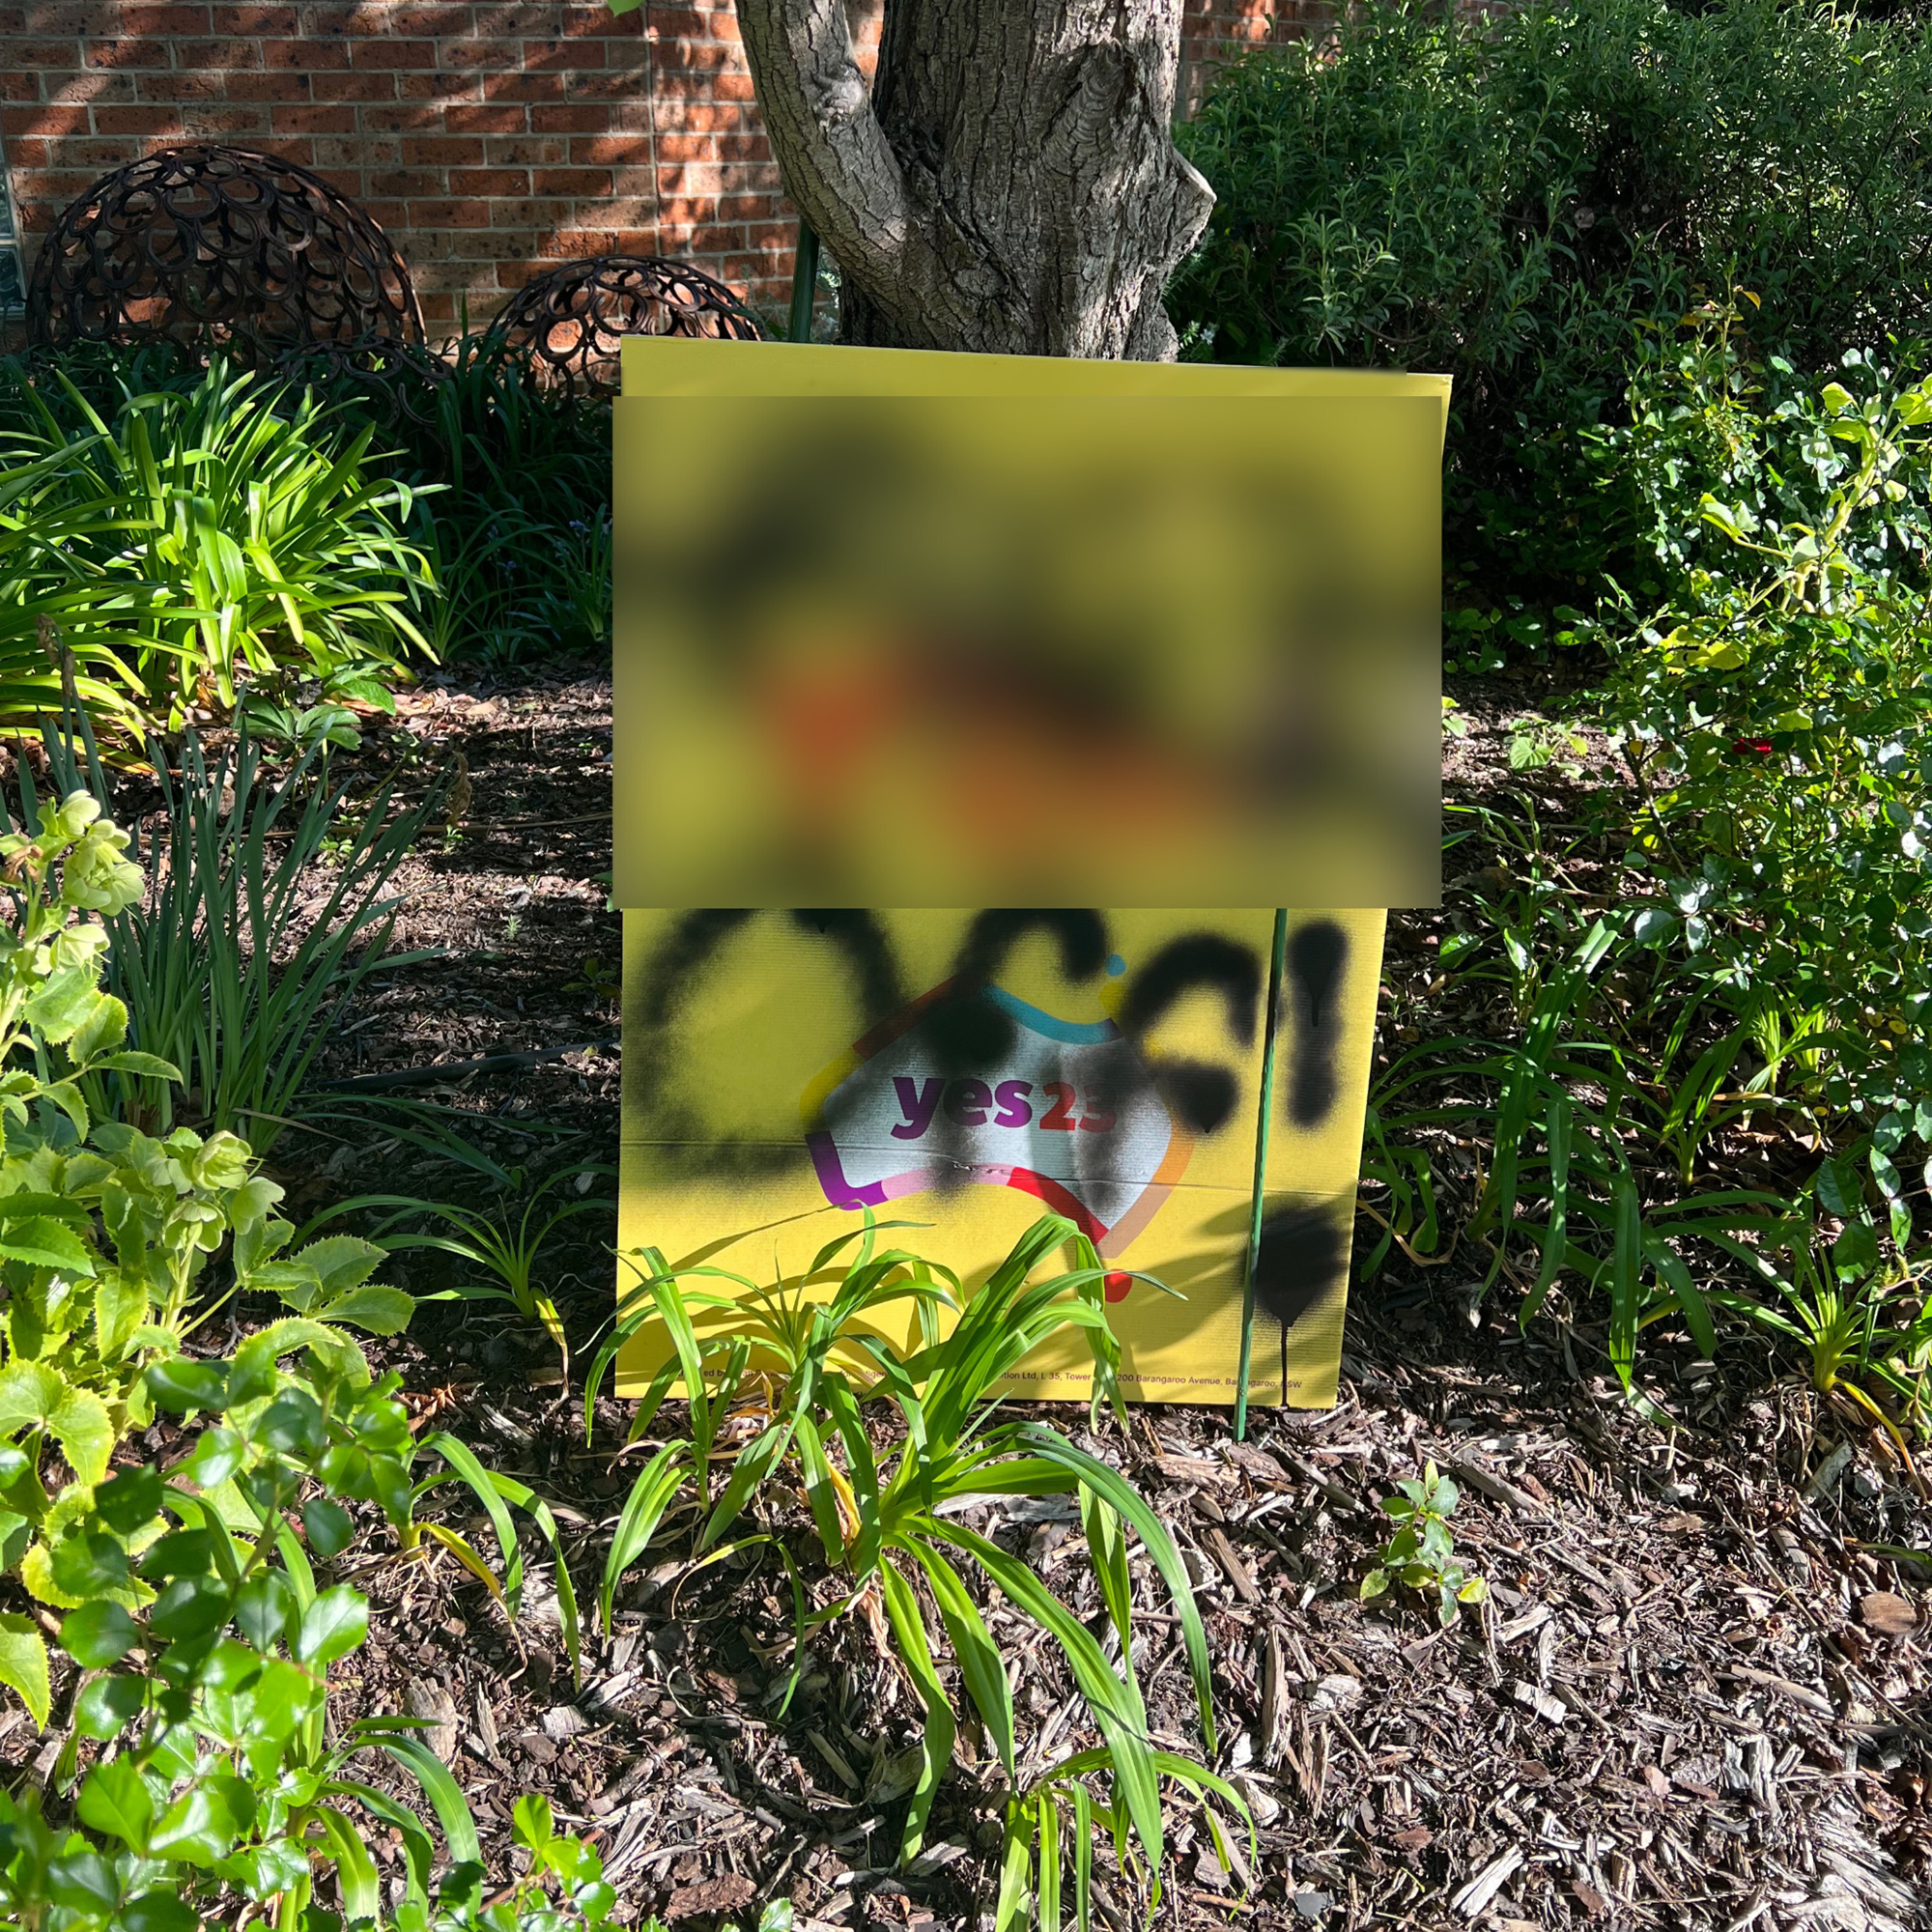 A yellow Yes sign with the phrase in question spray painted on, which has been blurred before publishing.